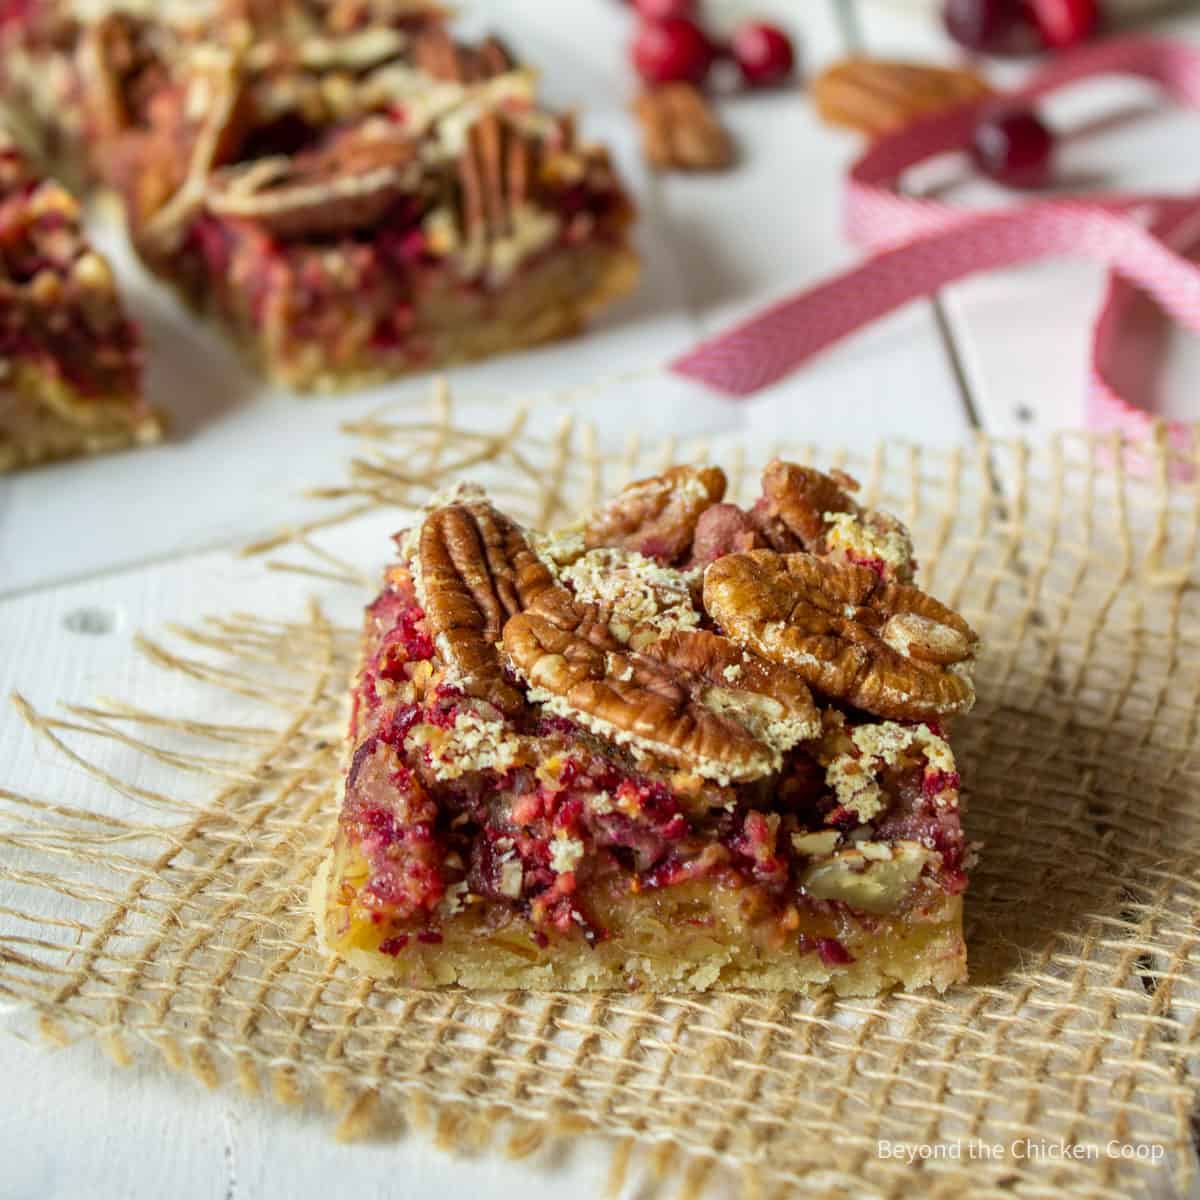 A cranberry bar topped with pecans.